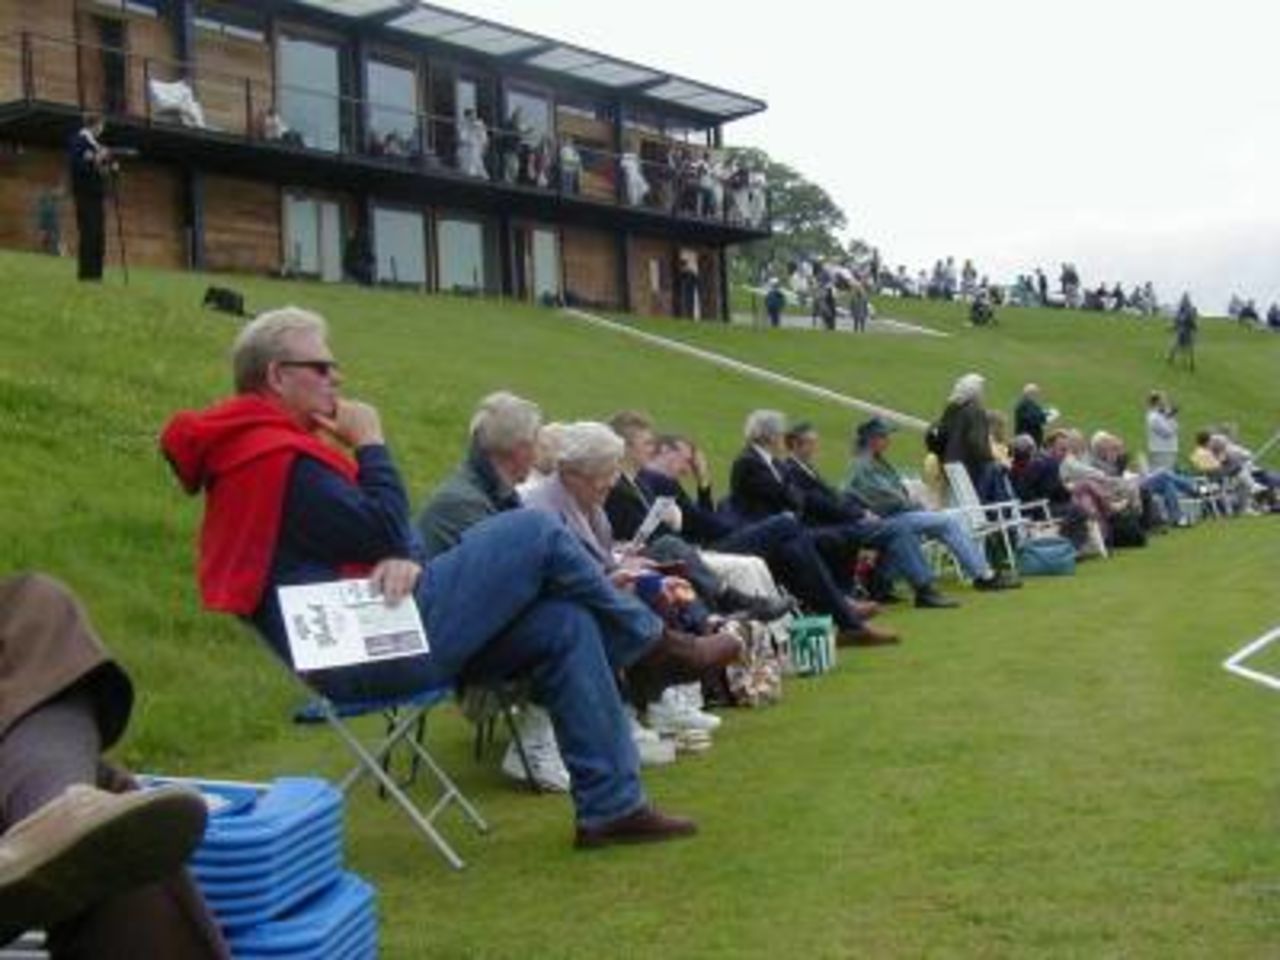 Spectators gather at Hampshire New Nursery Ground for the first day